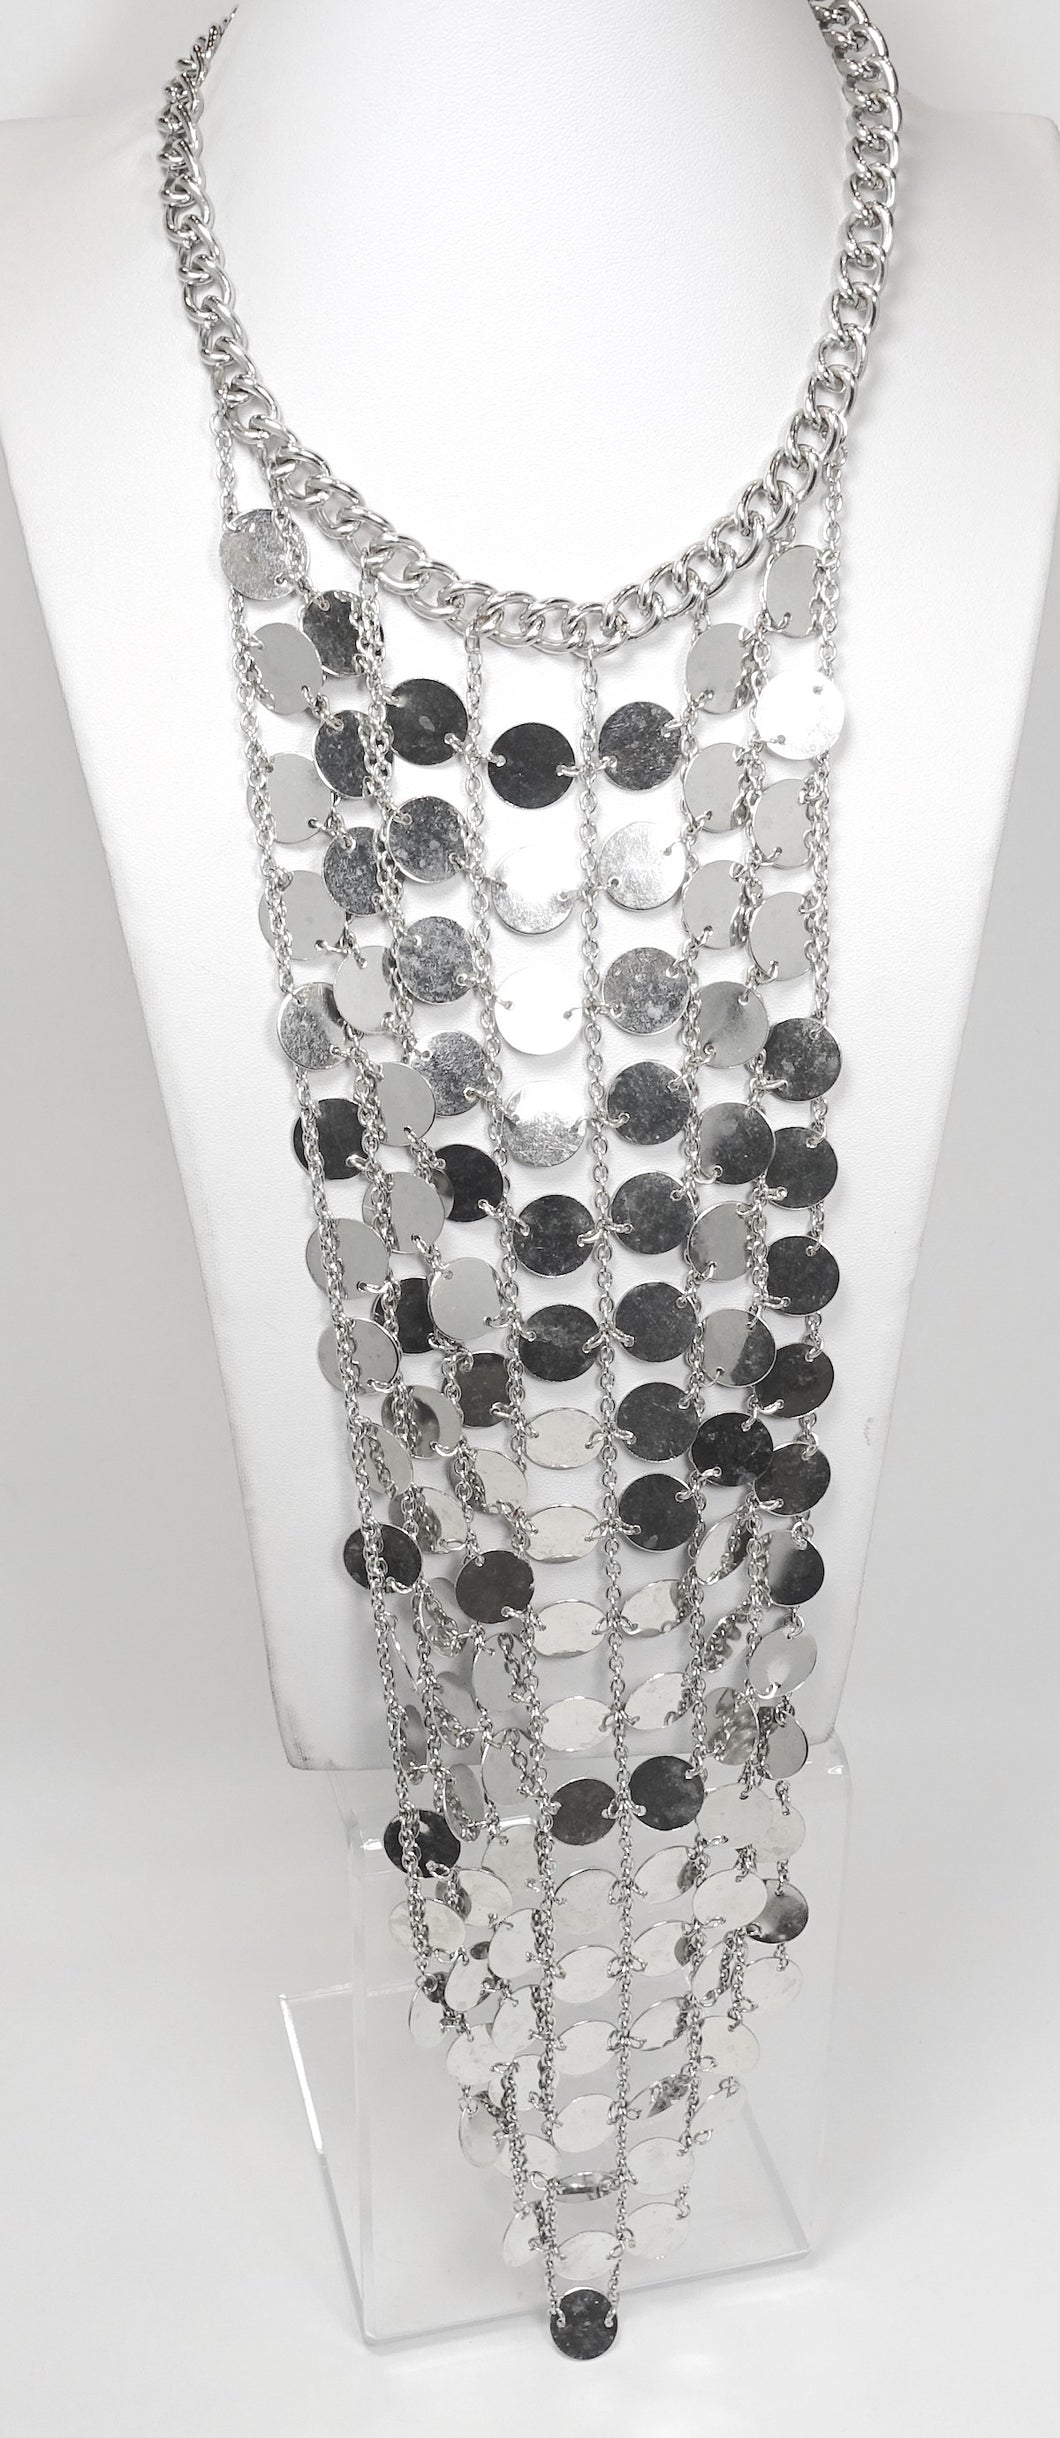 Vintage Extremely Long 1960s Chrome Drop Bib Necklace